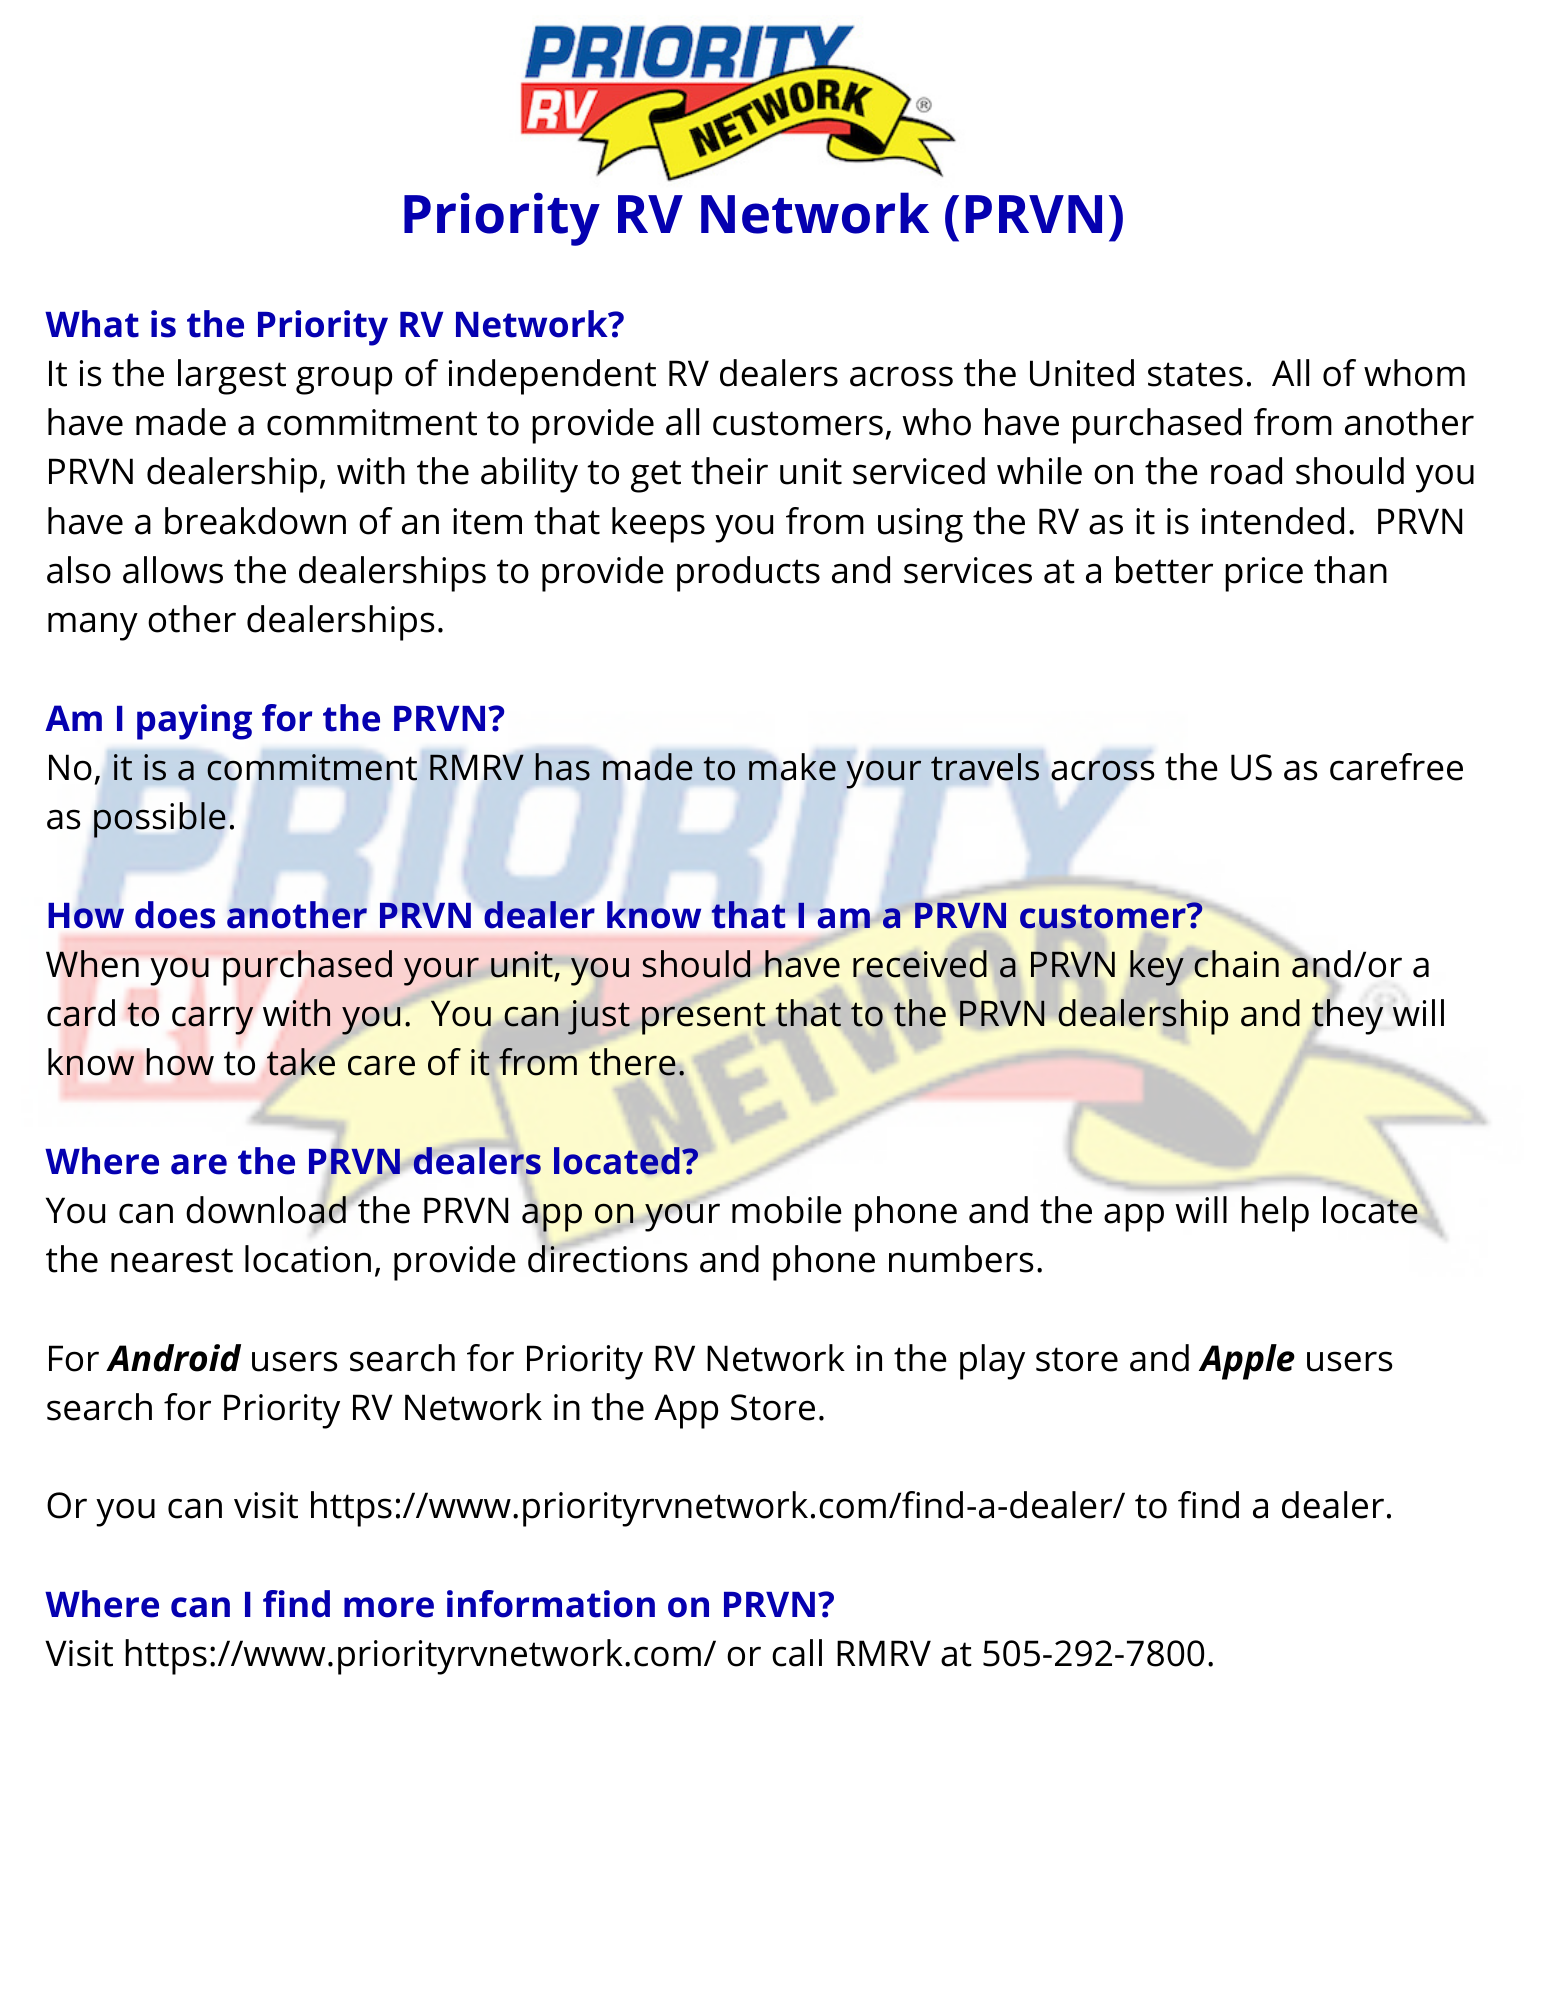 FAQ's About the Priority RV Network